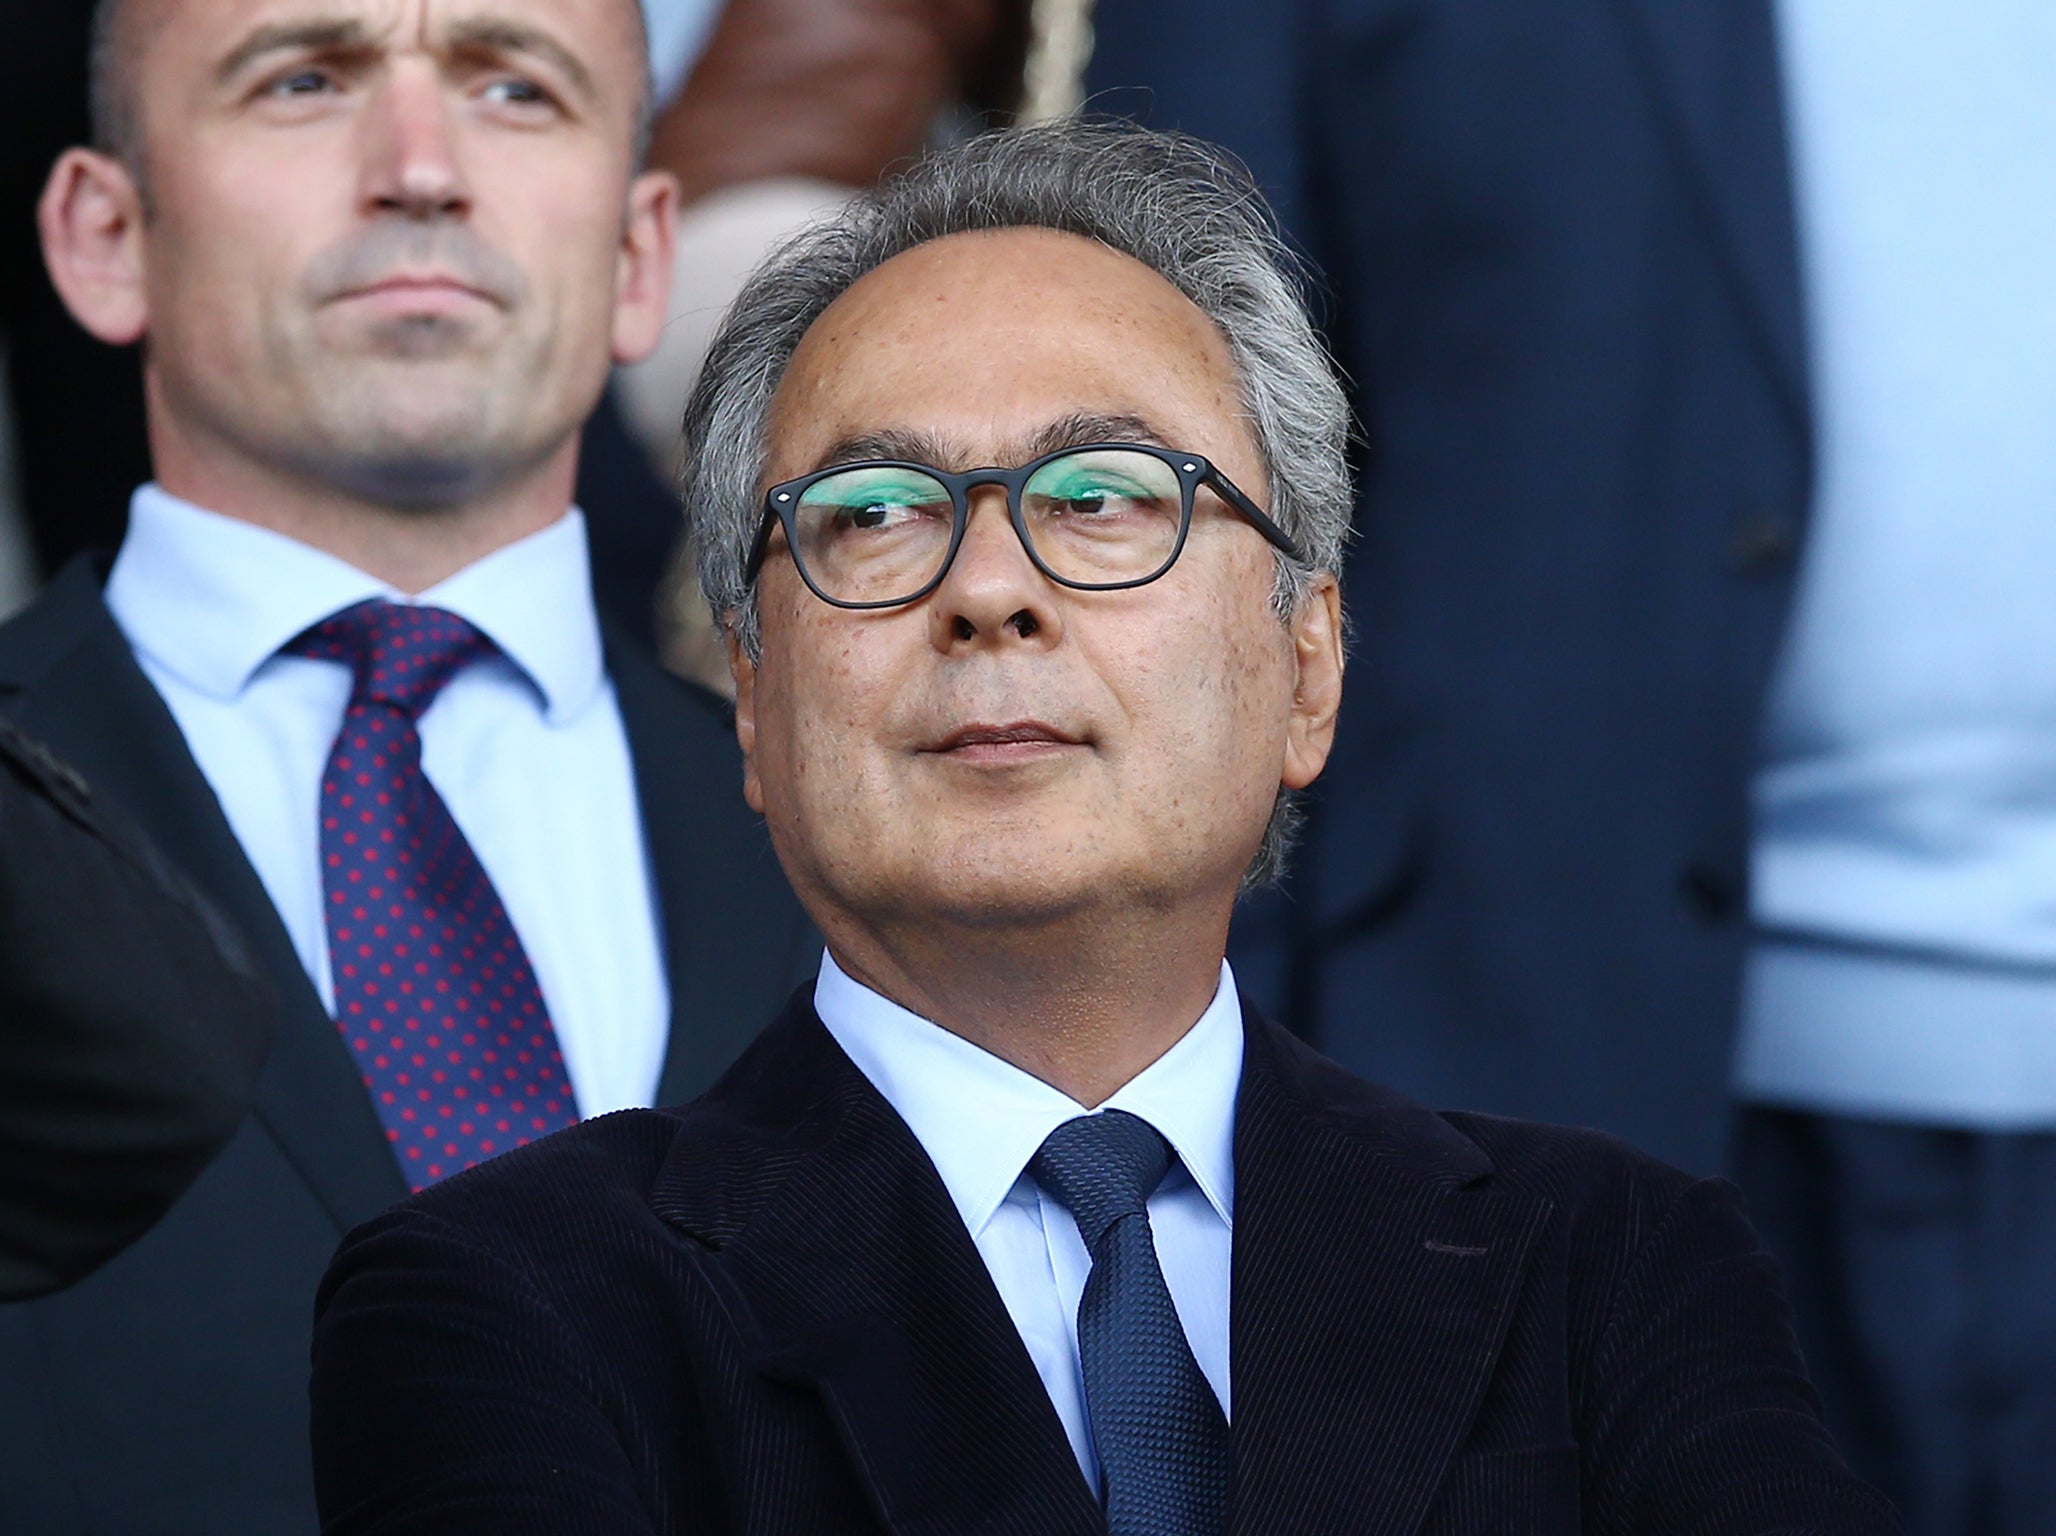 Farhad Moshiri is Everton's biggest shareholder but questioned are being asked over how he funded his investment